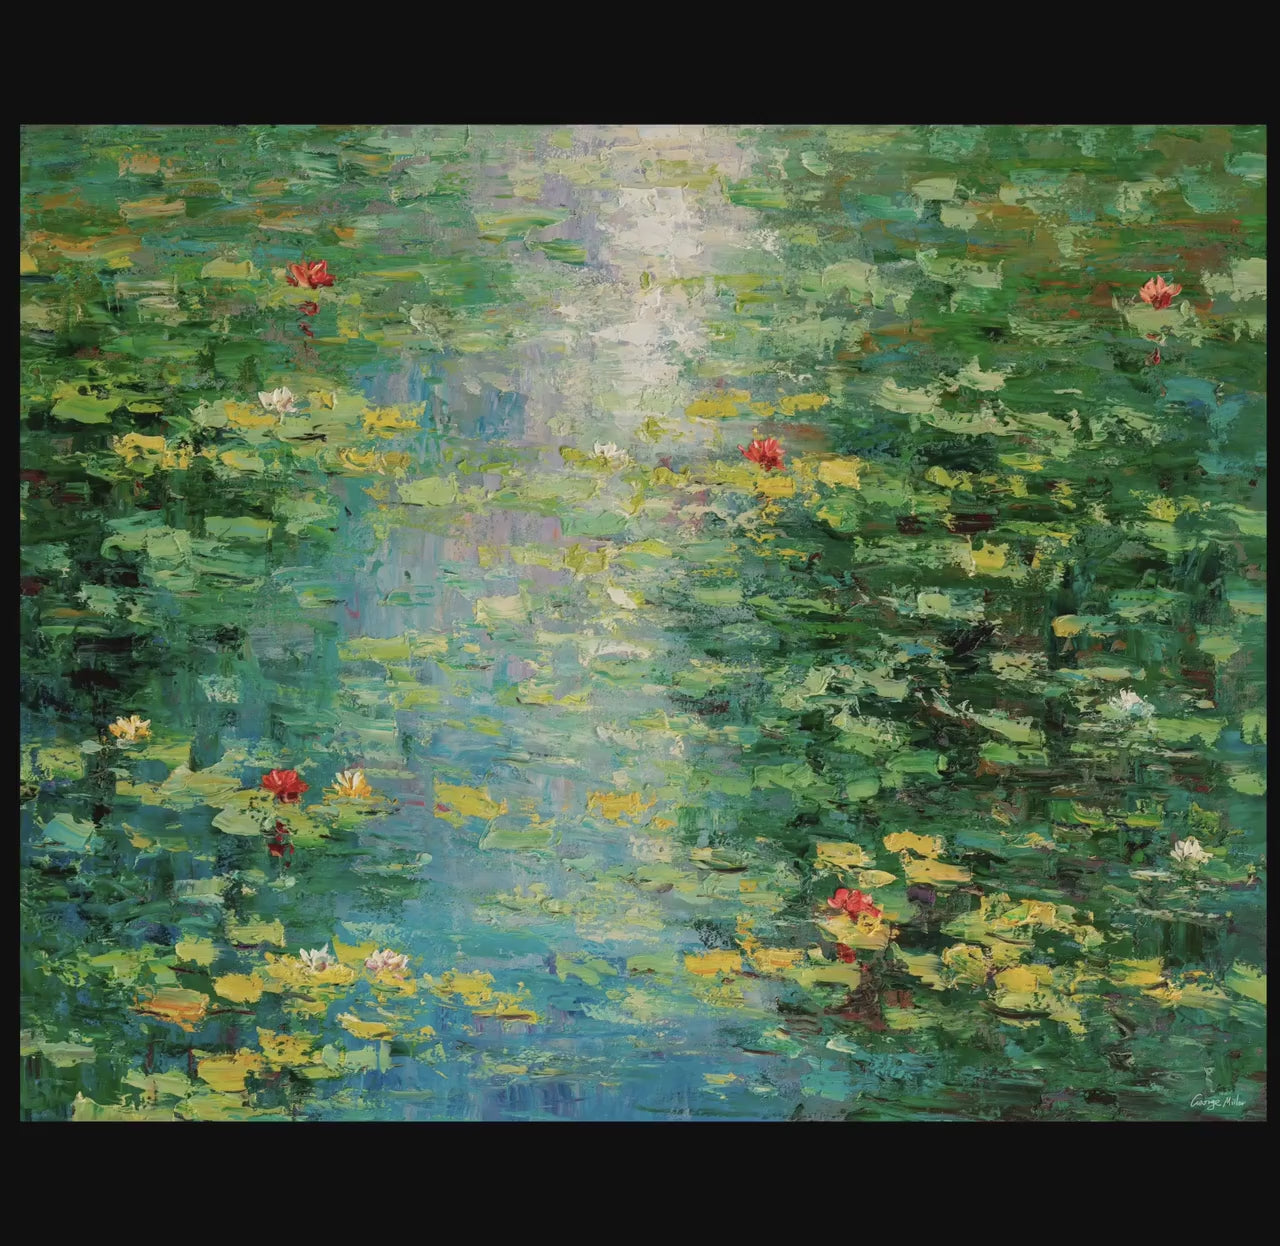 Experience the beauty of Spring with this Large Wall Art Oil Painting of Waterlilies Pond by George Miller, a colorful addition to any room